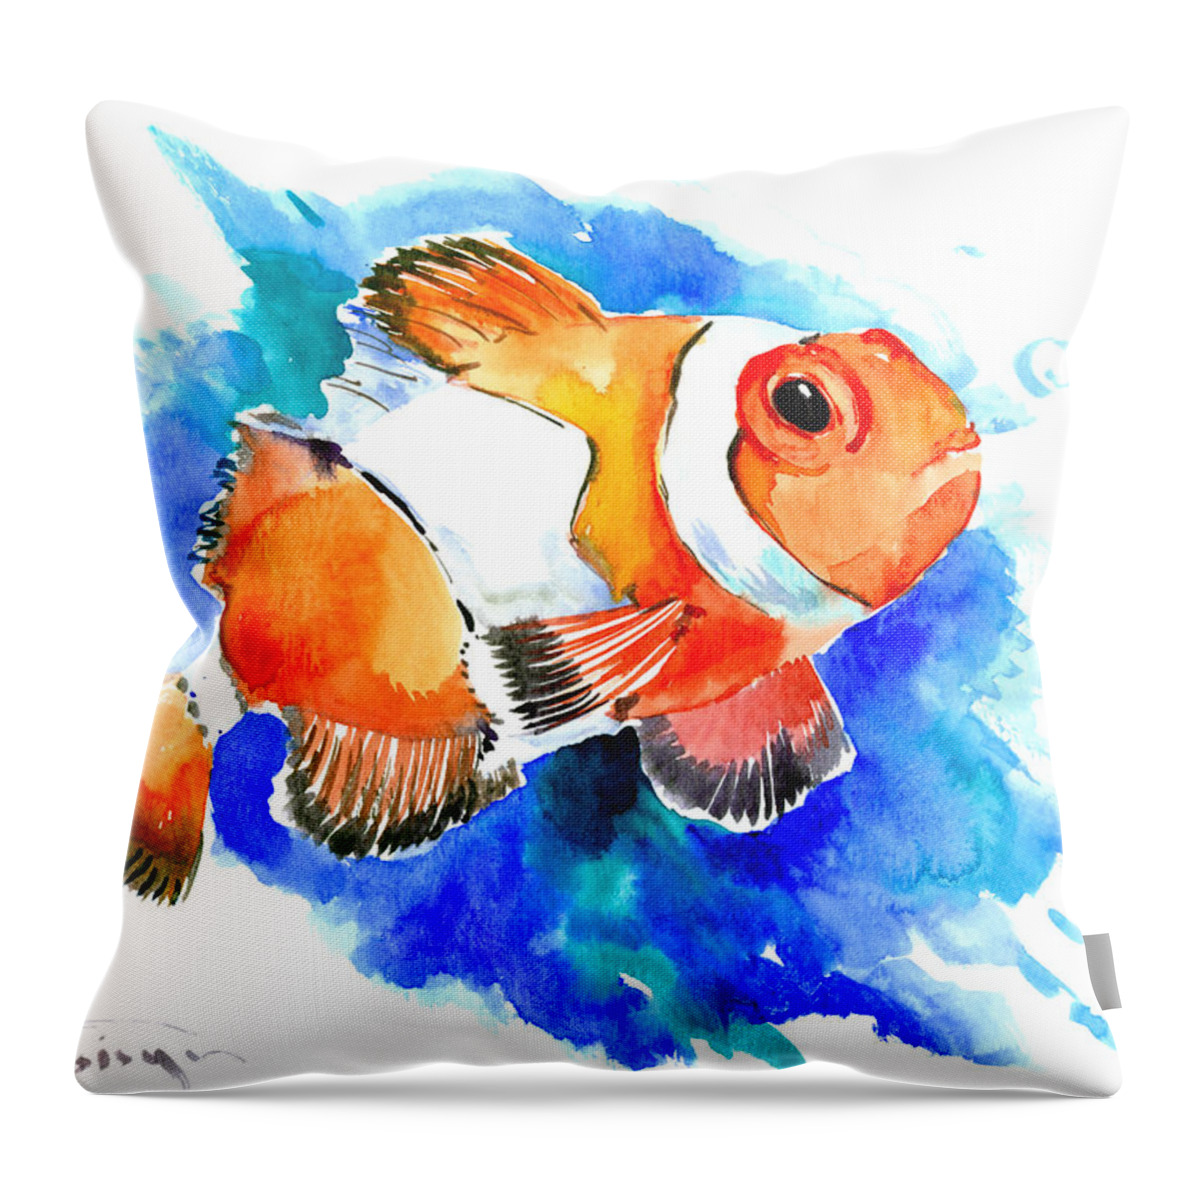 Clown Fish Throw Pillow featuring the painting Clownfish by Suren Nersisyan